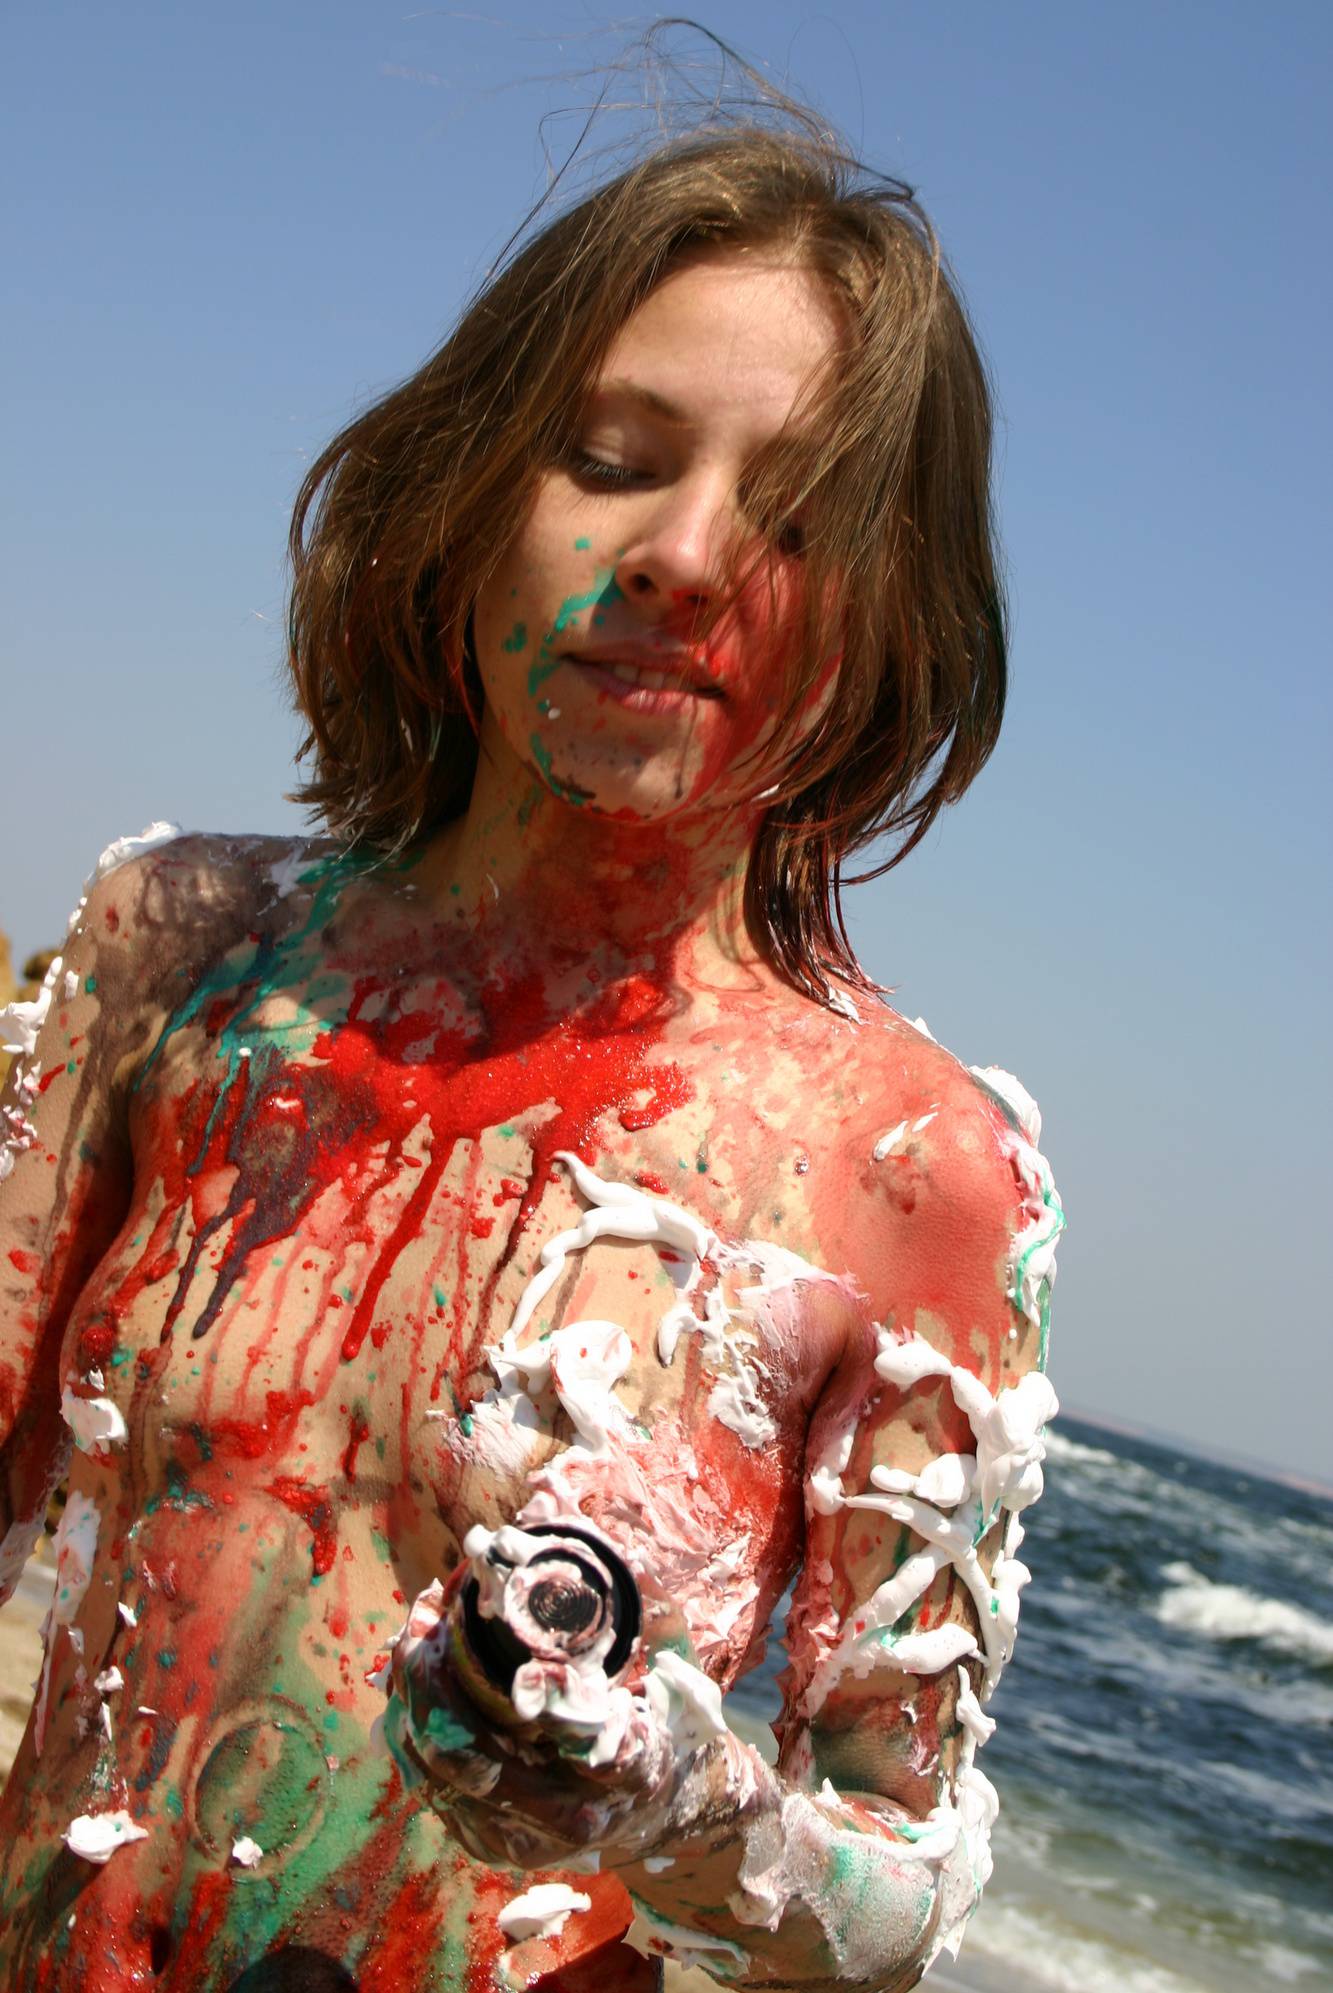 Beach Paint Fight Actions - 2